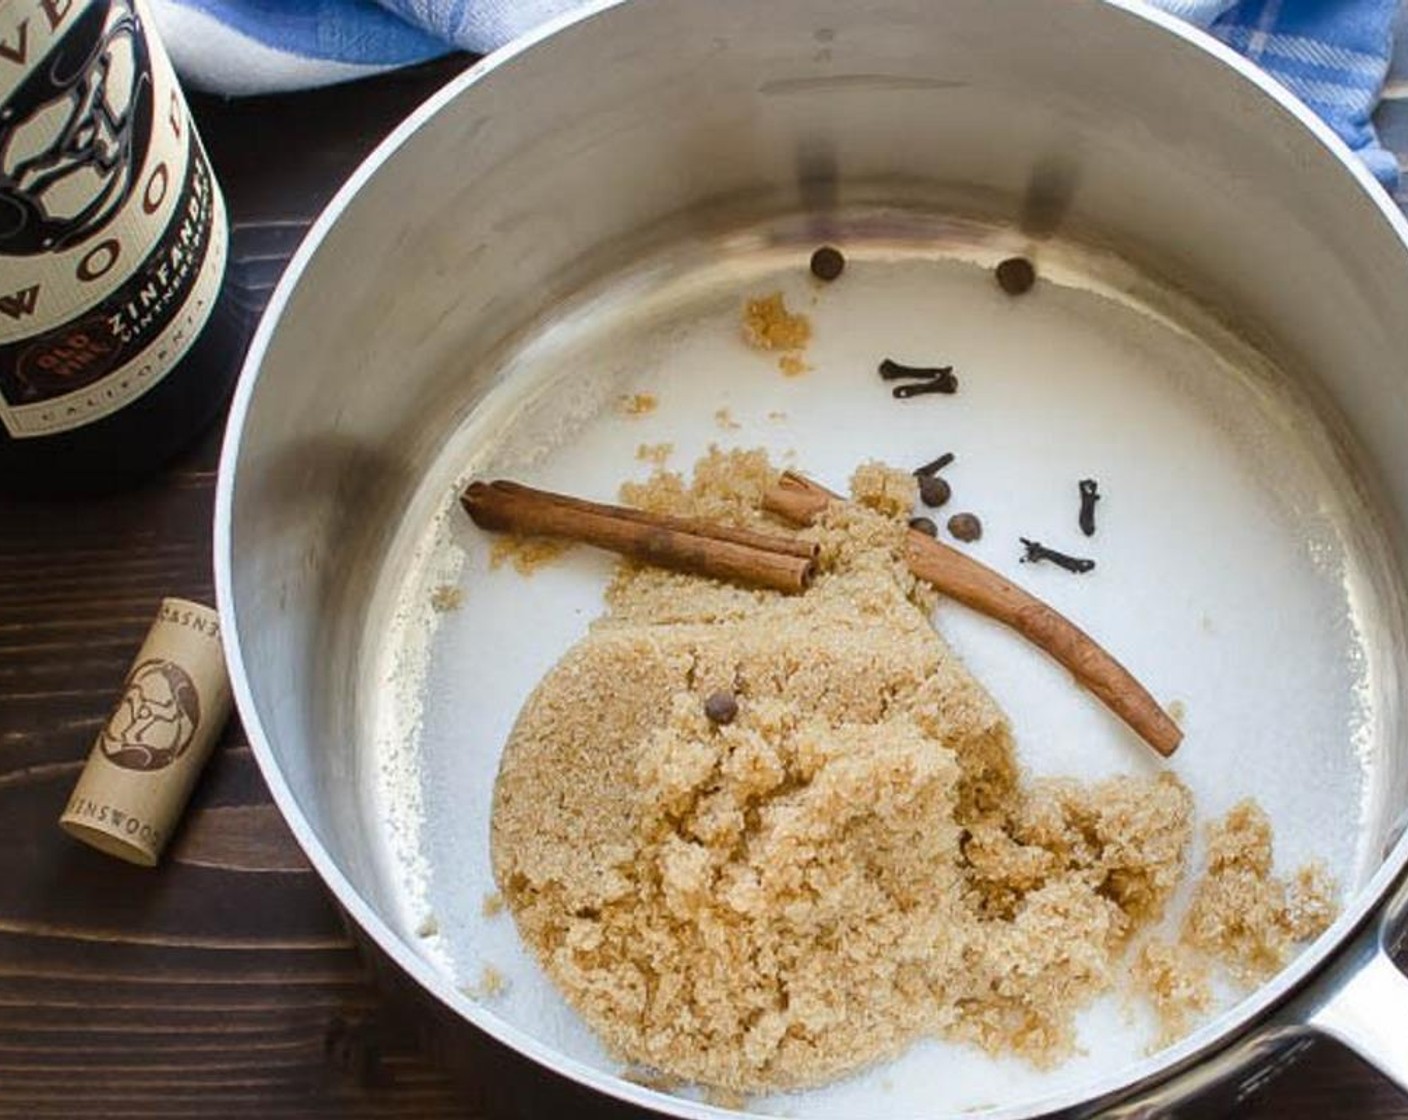 step 1 Into a medium saucepan, combine the Brown Sugar (1 cup), Granulated Sugar (3/4 cup), Whole Cloves (6), Whole Allspice (6), Cinnamon Sticks (2), Orange (1), and Red Wine (1 1/2 cups).